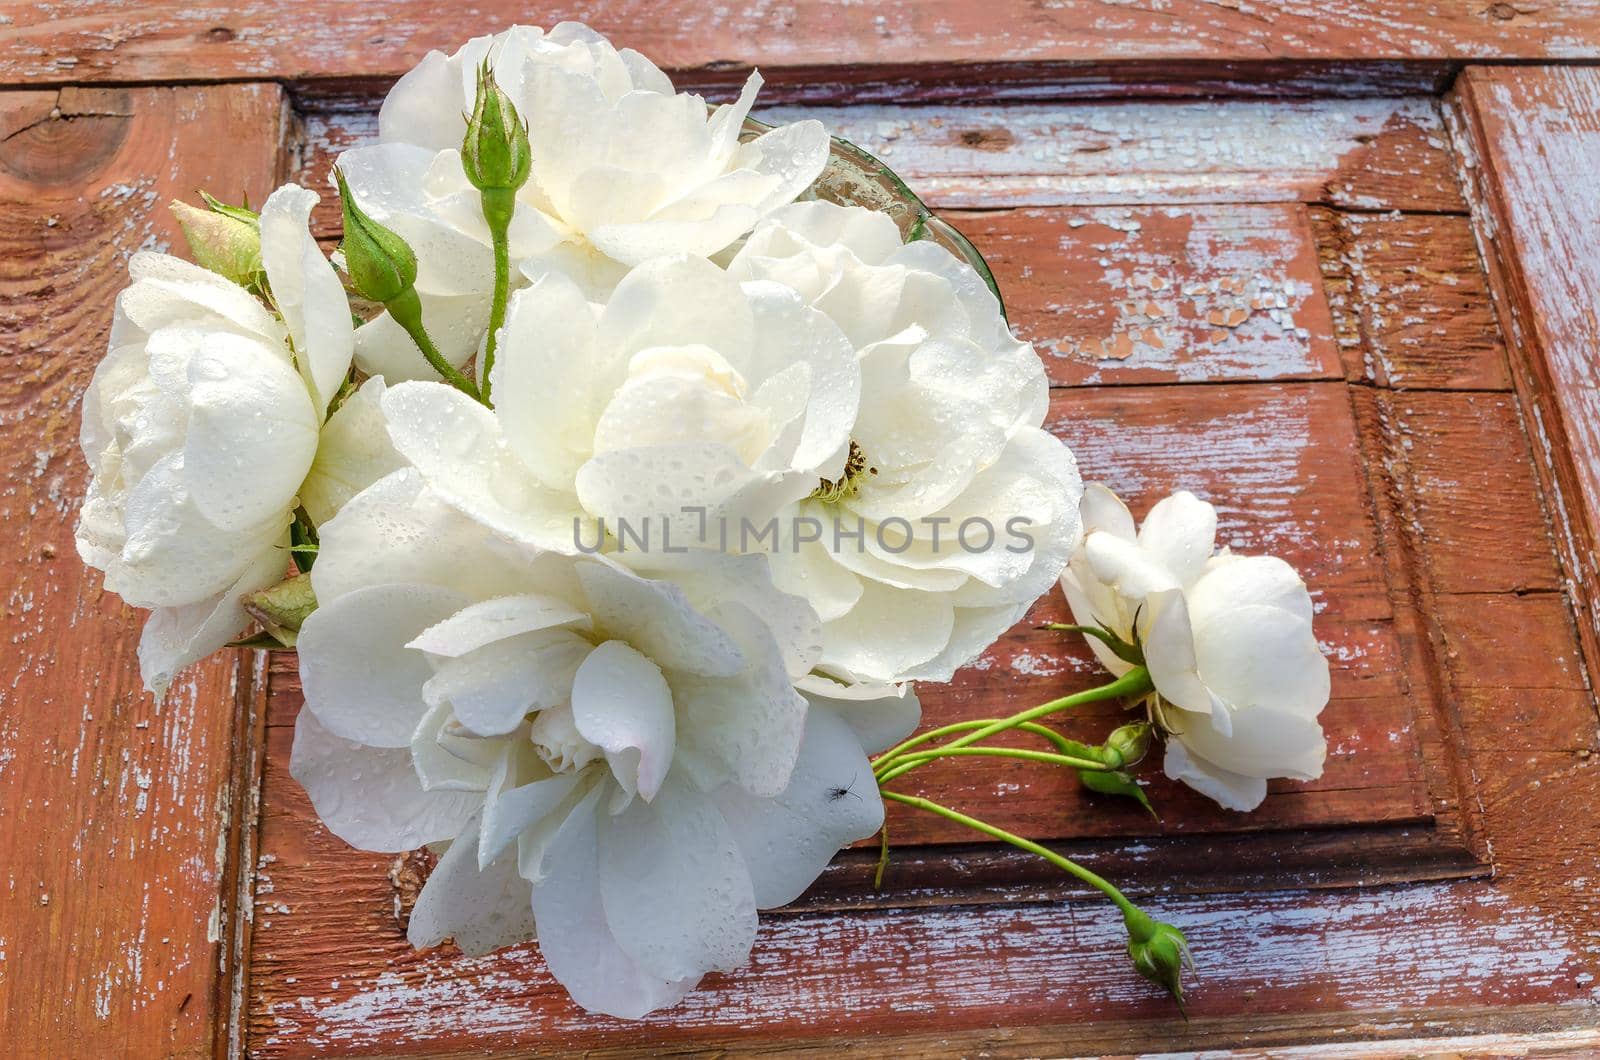 Beautiful bouquet of roses with drops on old wooden table. After the rain. Overhead view. Rustic style.